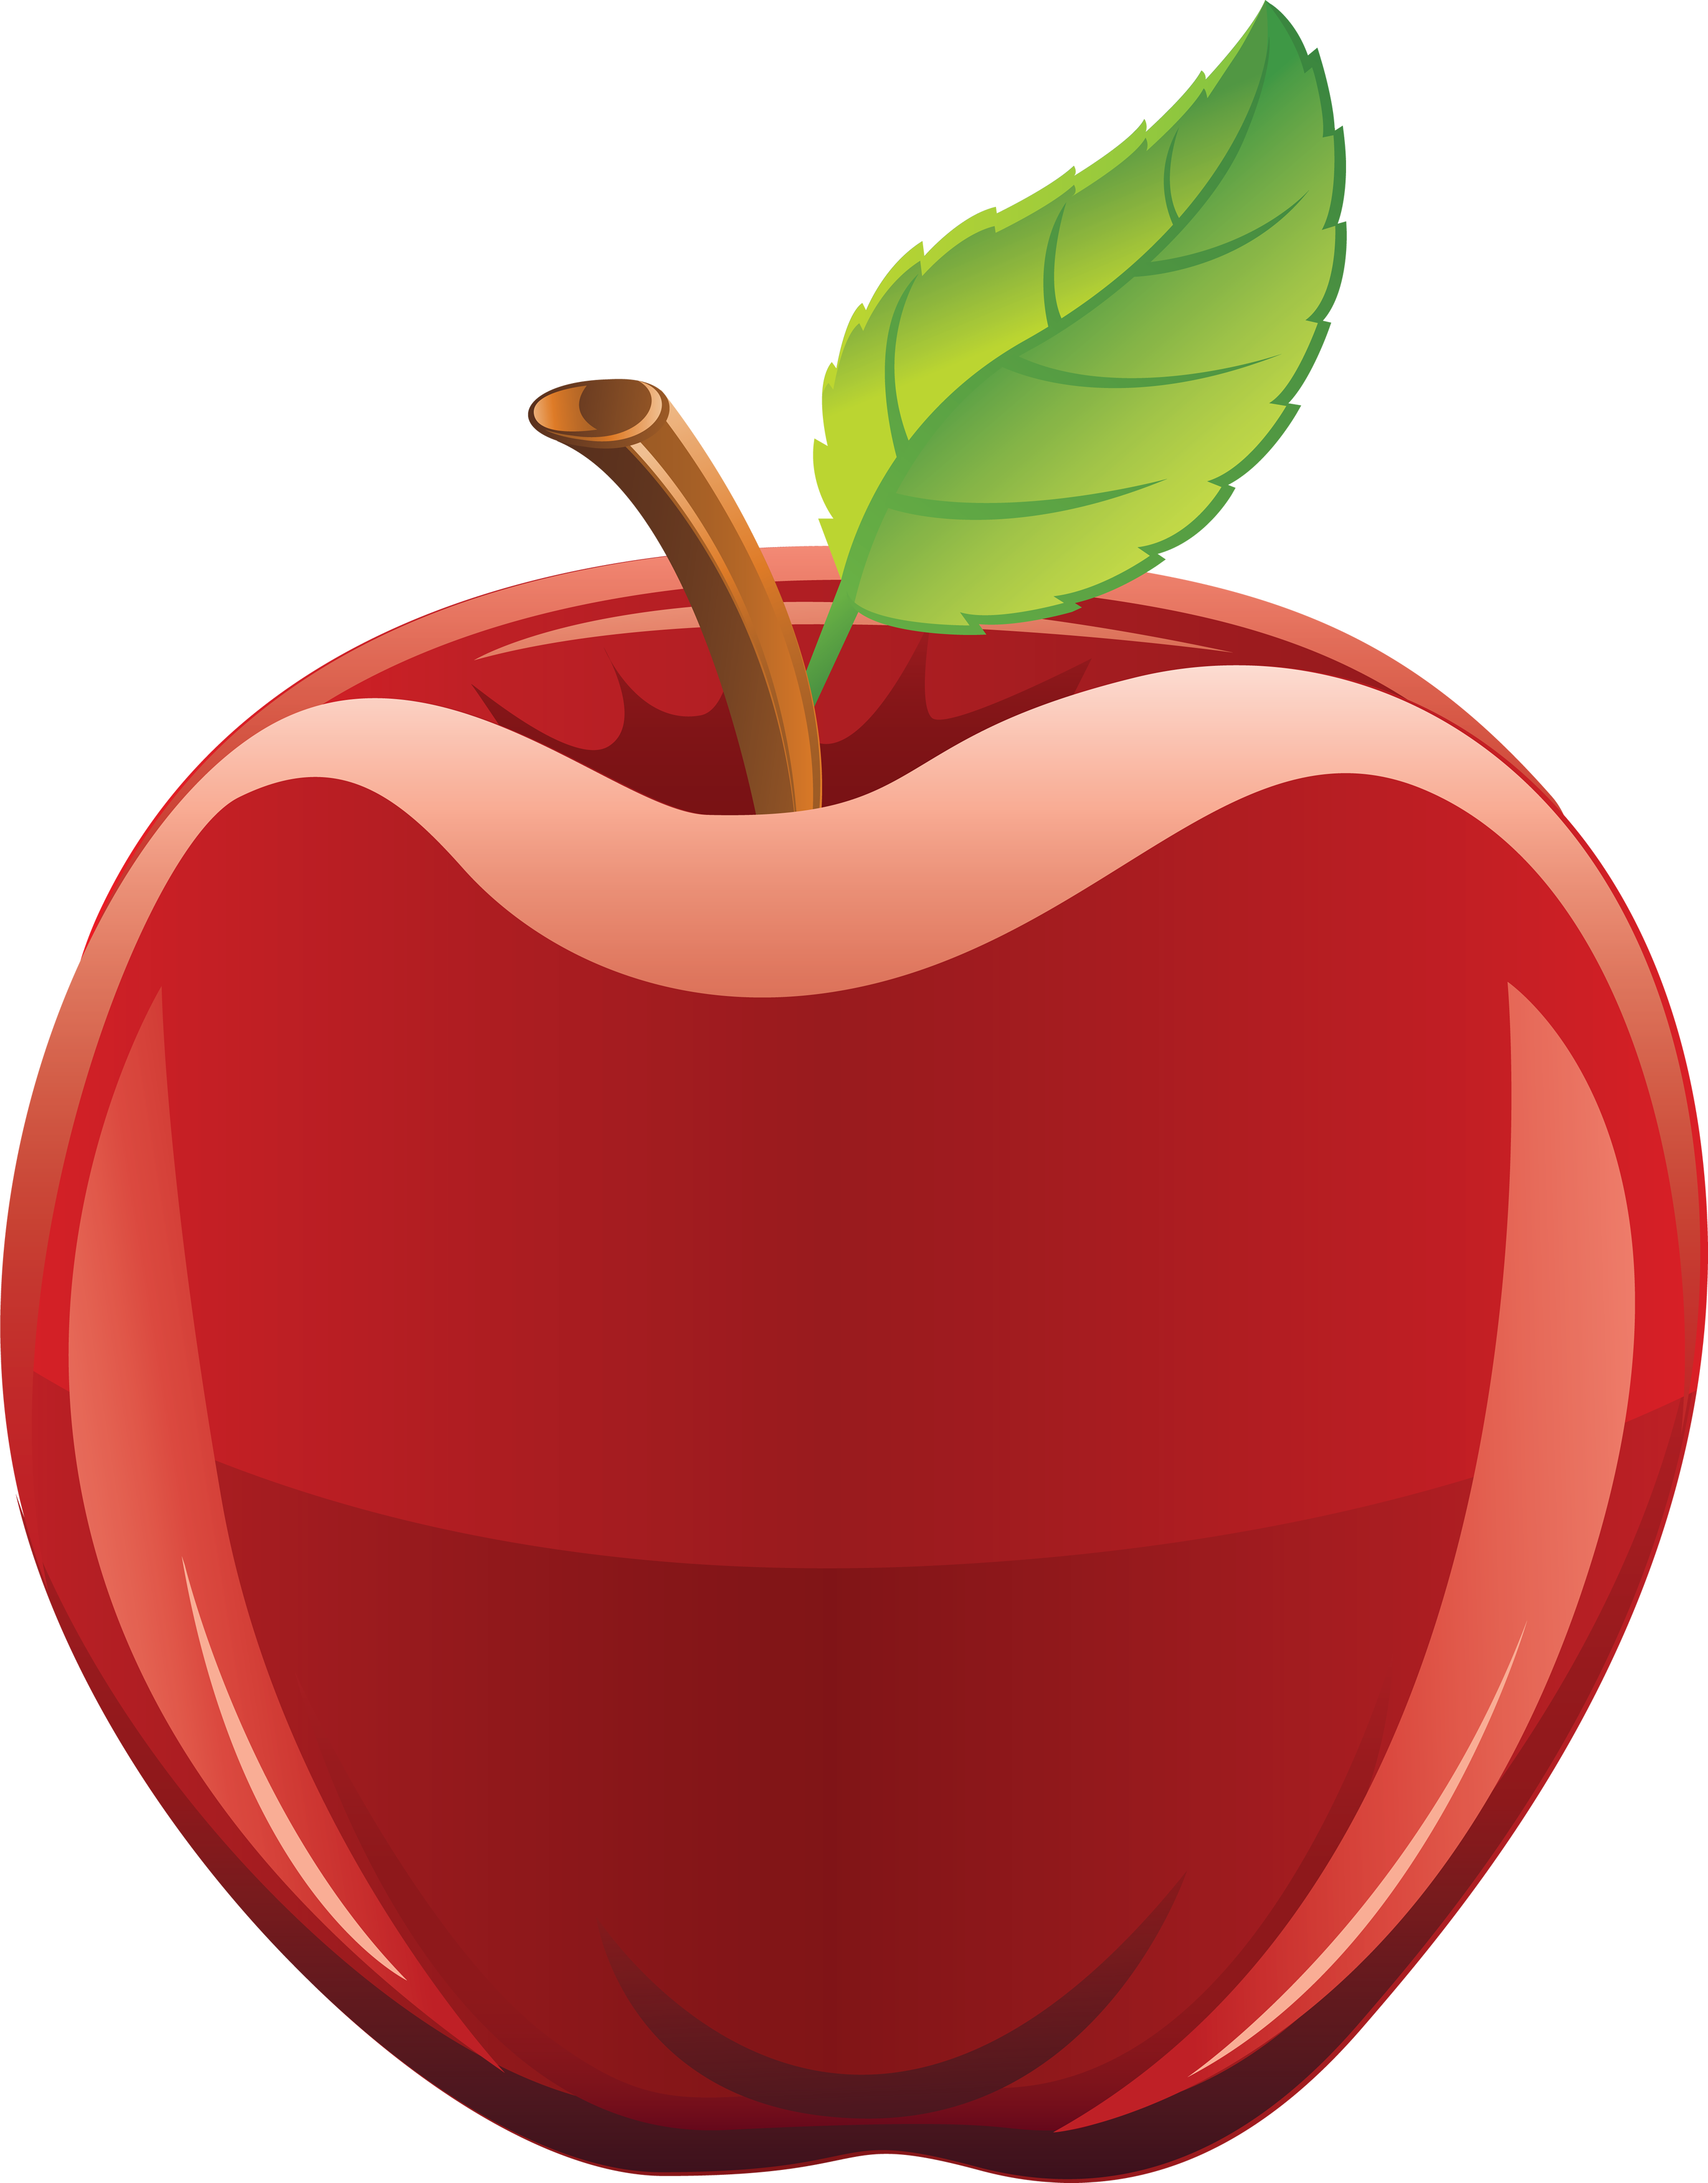 Red apple clipart free clipar - Clipart Of Apple